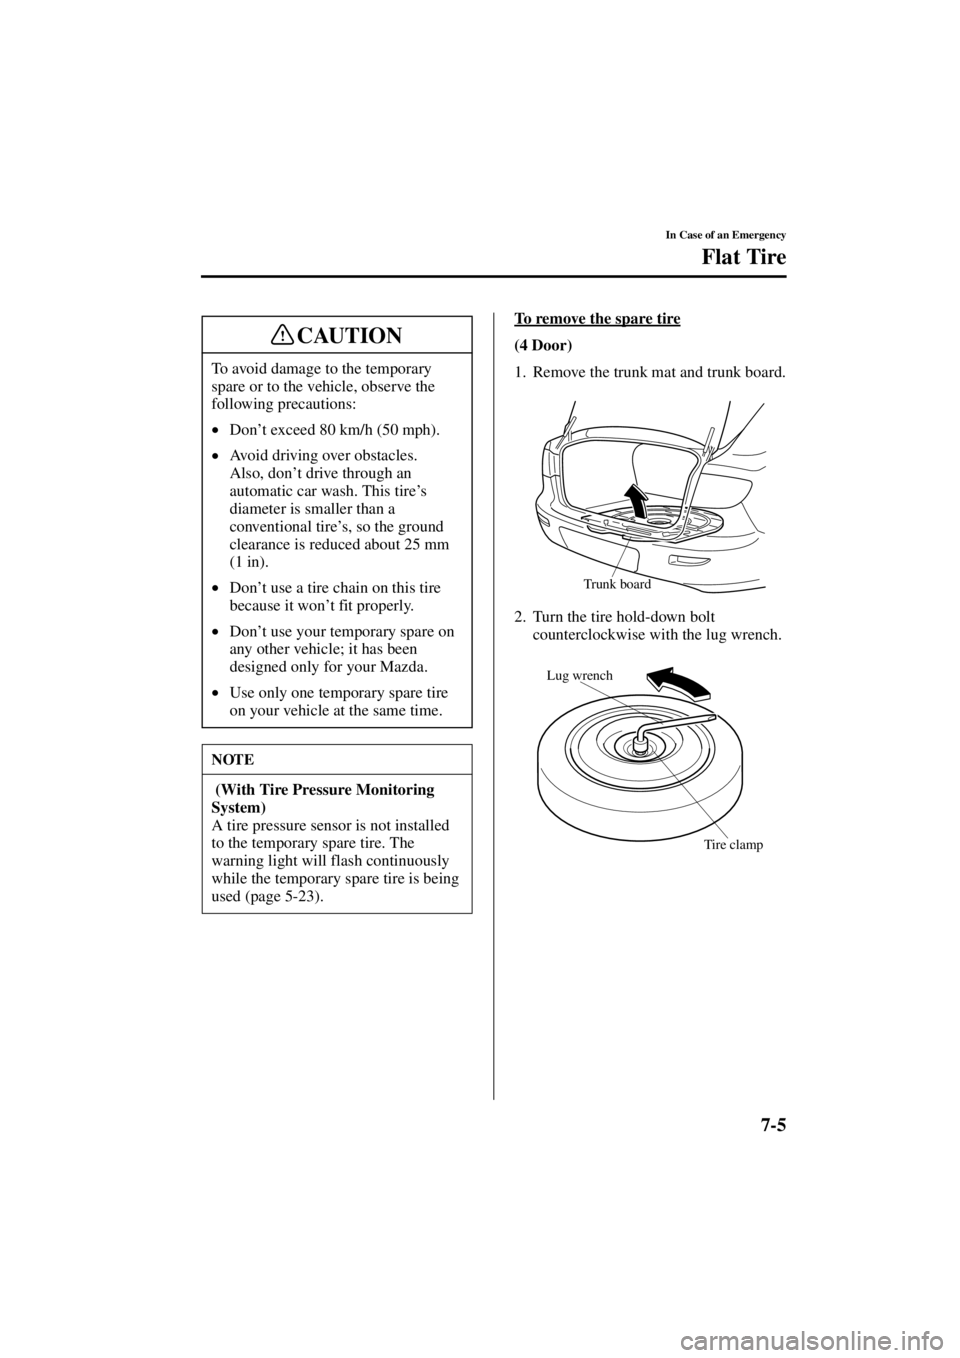 MAZDA MODEL 3 5-DOOR 2004  Owners Manual 7-5
In Case of an Emergency
Flat Tire
Form No. 8S18-EA-03I
To remove the spare tire
(4 Door)
1. Remove the trunk mat and trunk board.
2. Turn the tire hold-down bolt counterclockwise with the lug wren